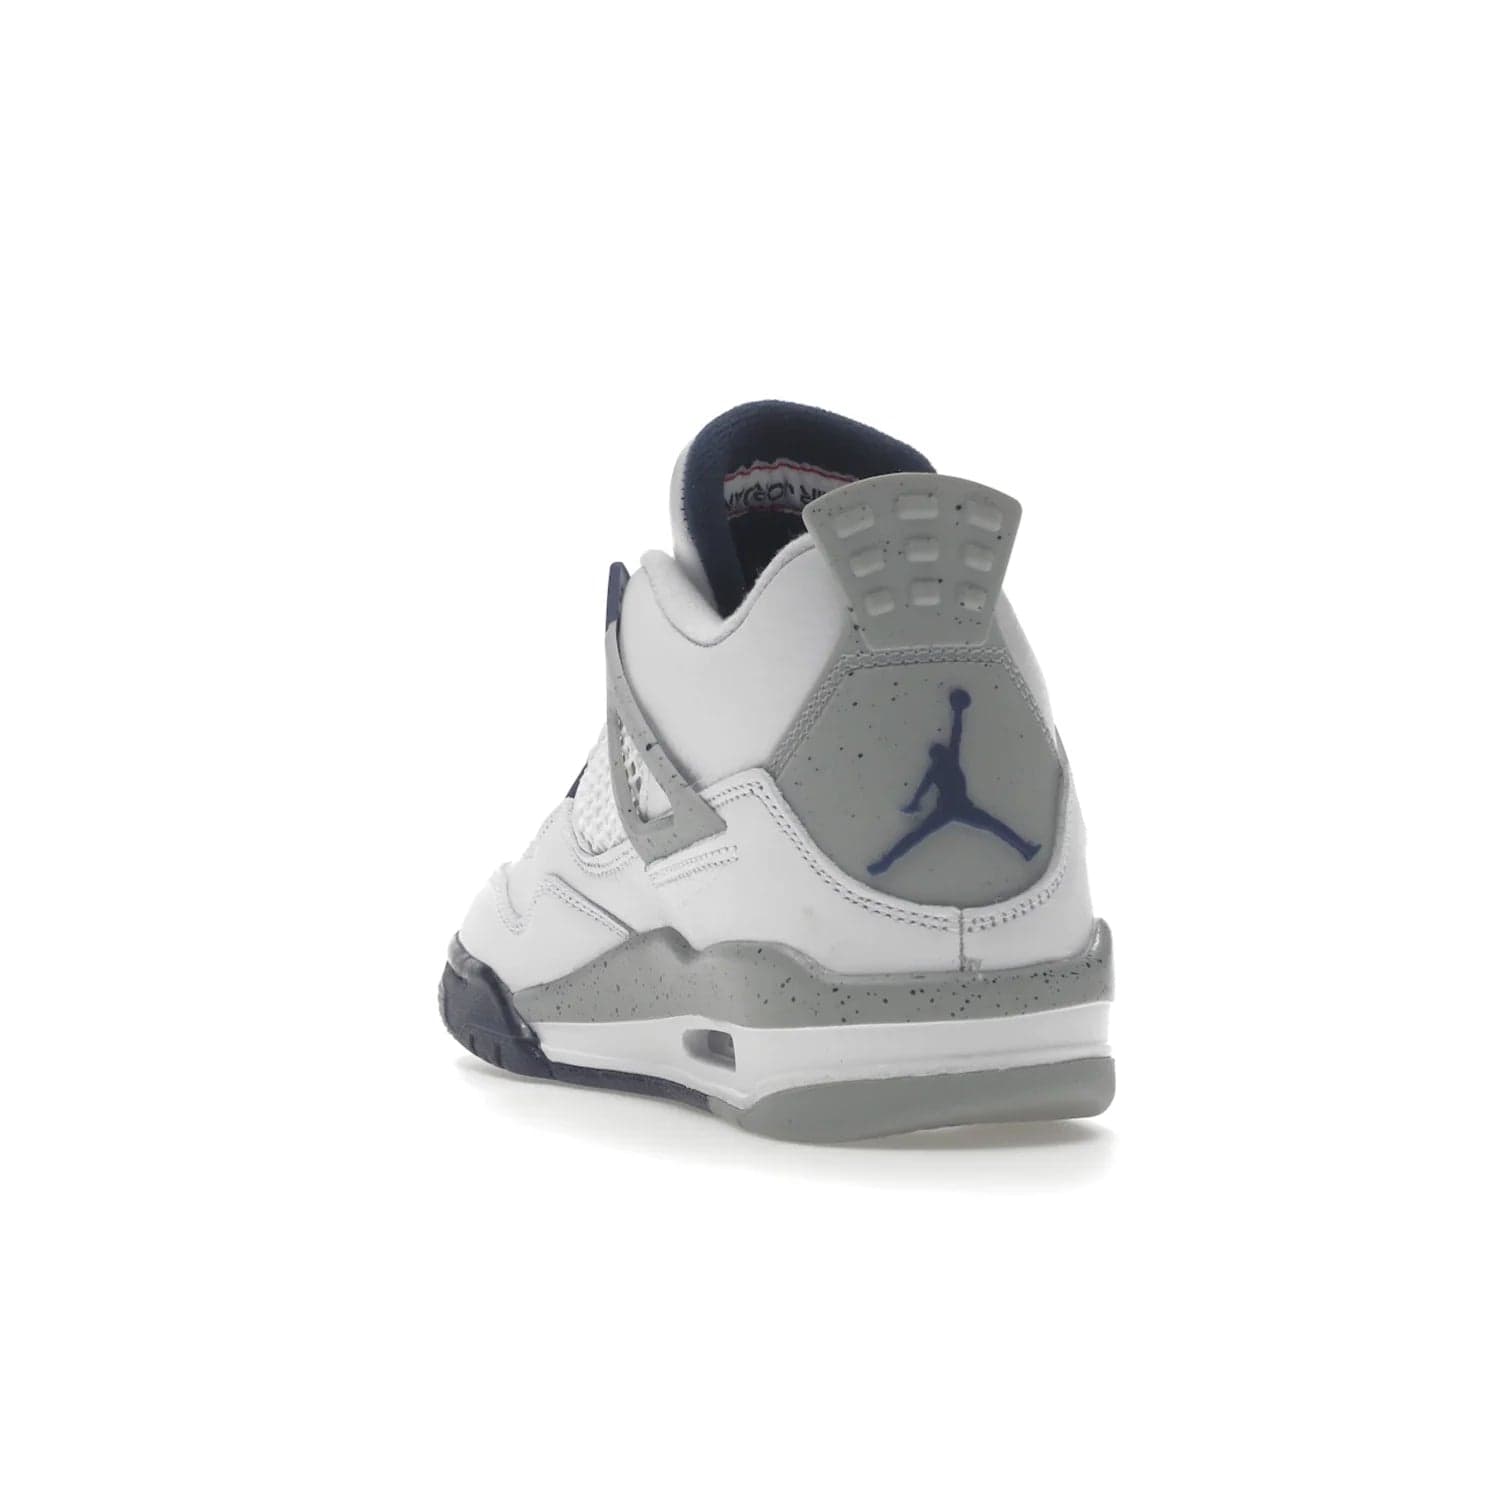 Jordan 4 Retro Midnight Navy (GS) - Image 26 - Only at www.BallersClubKickz.com - Shop the Air Jordan 4 Retro Midnight Navy GS. The white leather upper features black support wings & heel tab, navy eyelets & woven tongue tag with Jumpman logos. The midsole features two-tone polyurethane insole & AIR units in the heel & forefoot. Get the white/midnight navy/light smoke grey/fire colorway & show off your style.